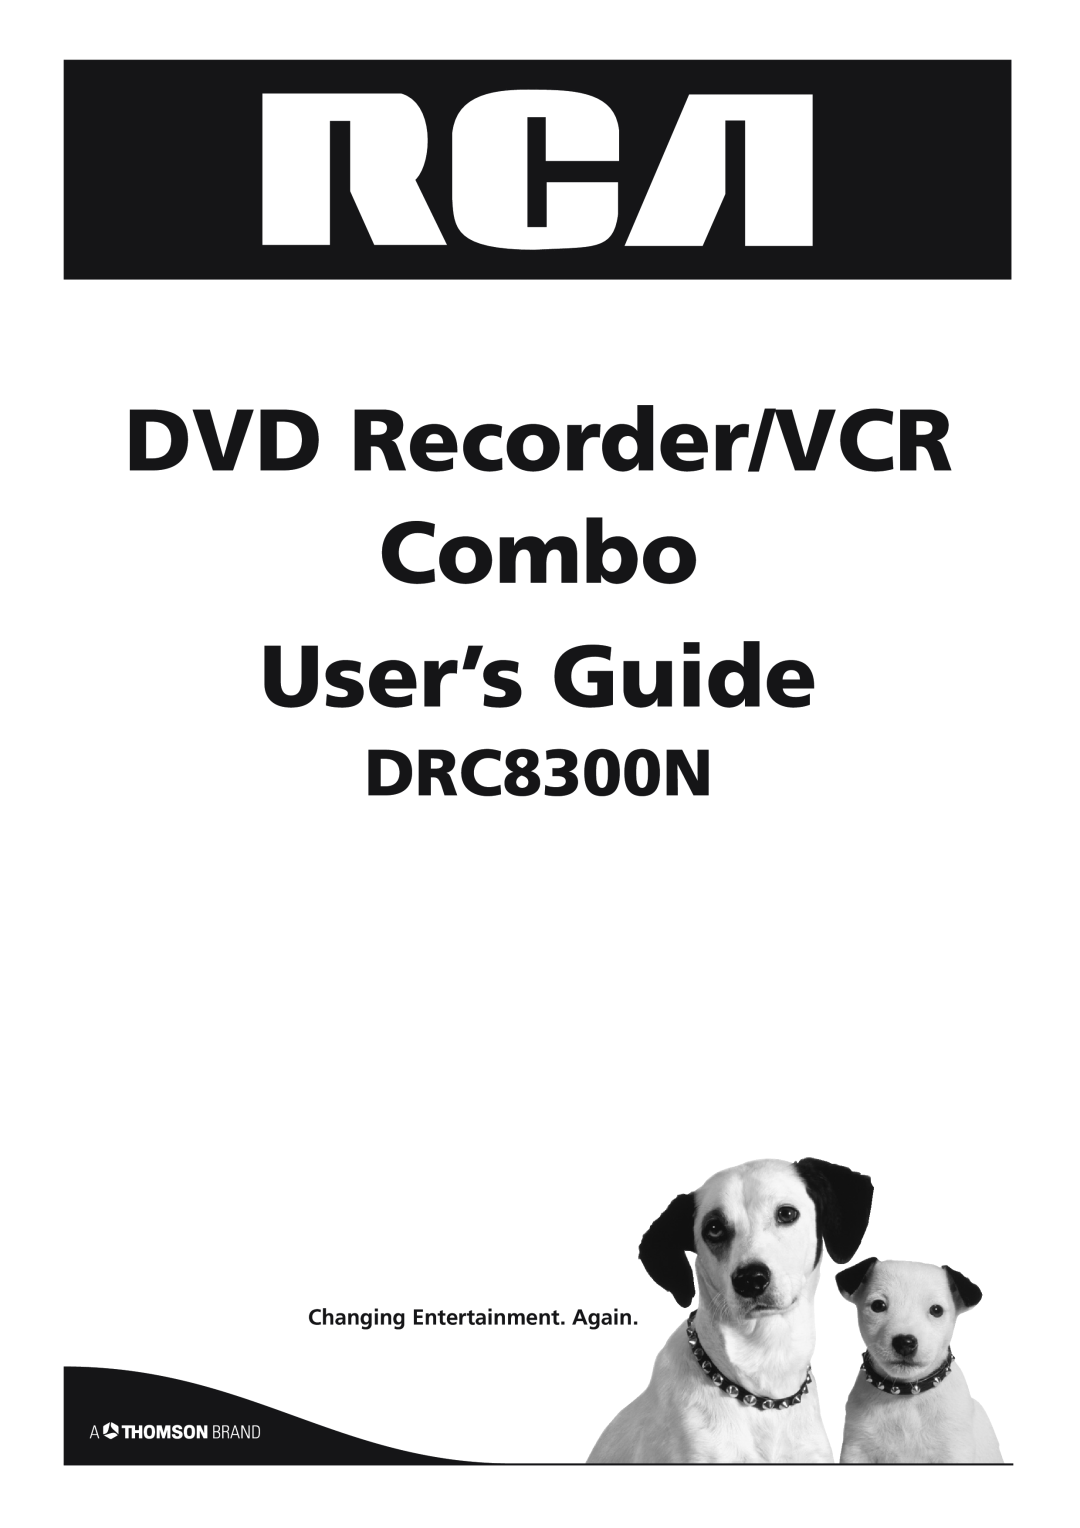 RCA DRC8300N manual DVD Recorder/VCR, Combo User’s Guide, Changing Entertainment. Again 